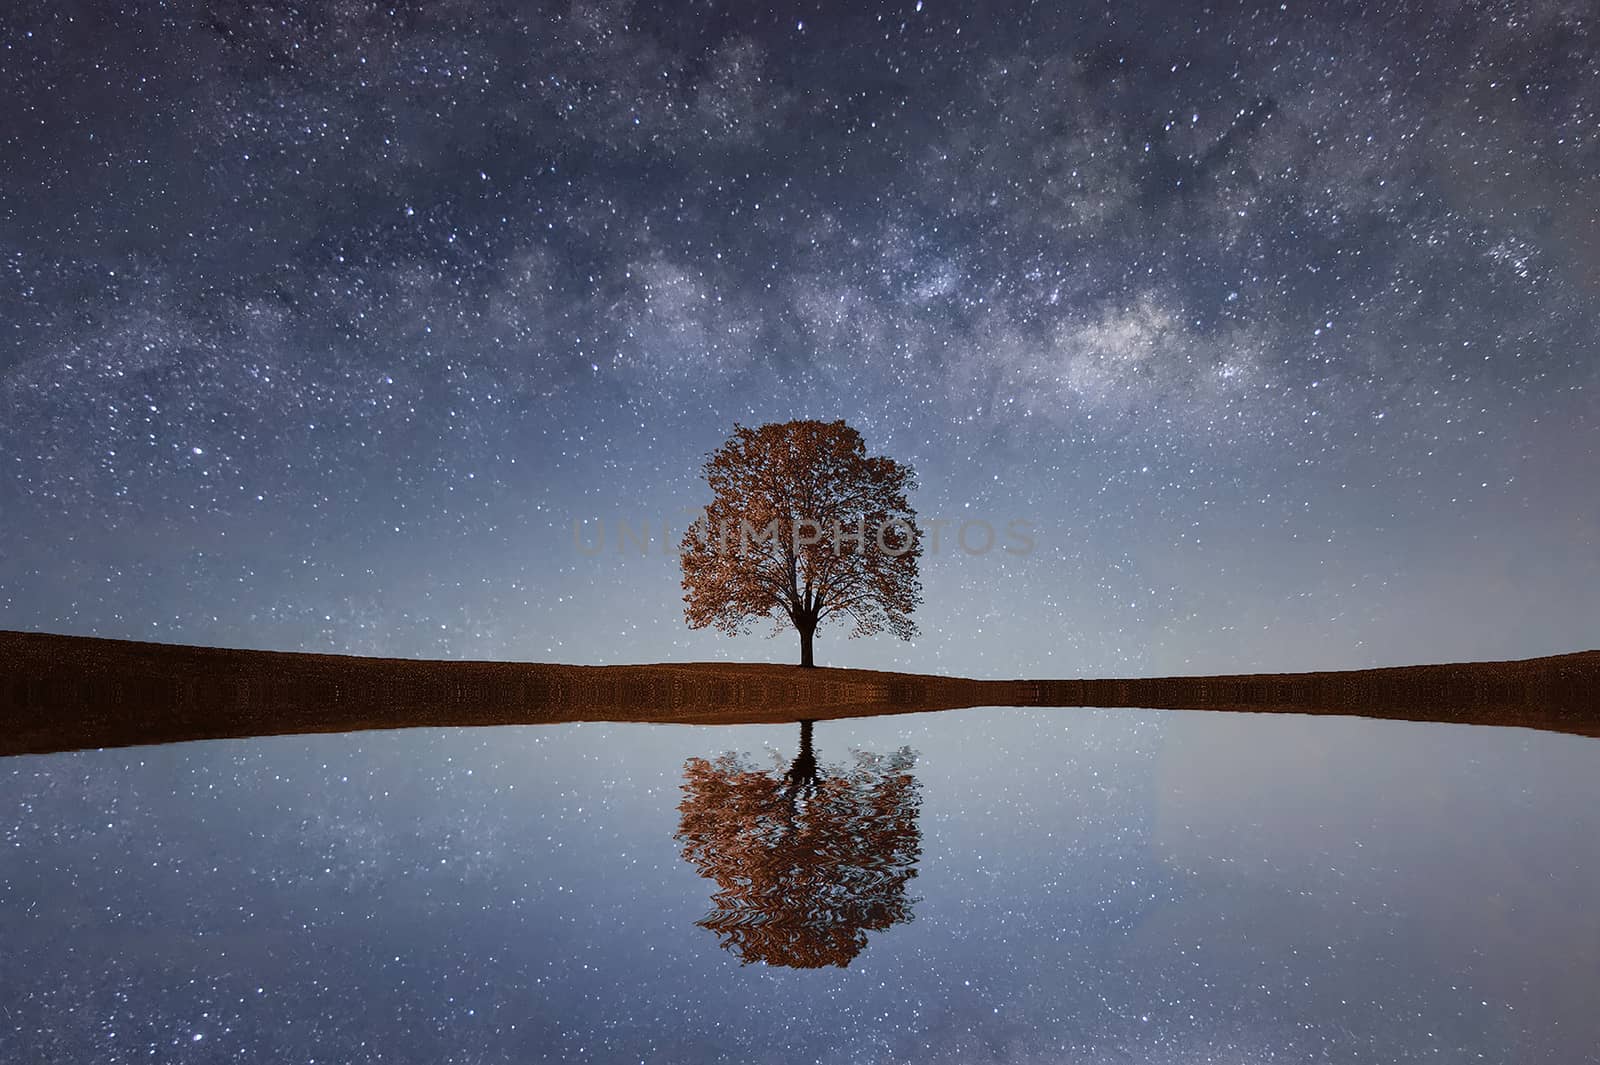 Milky Way over a lonely single tree